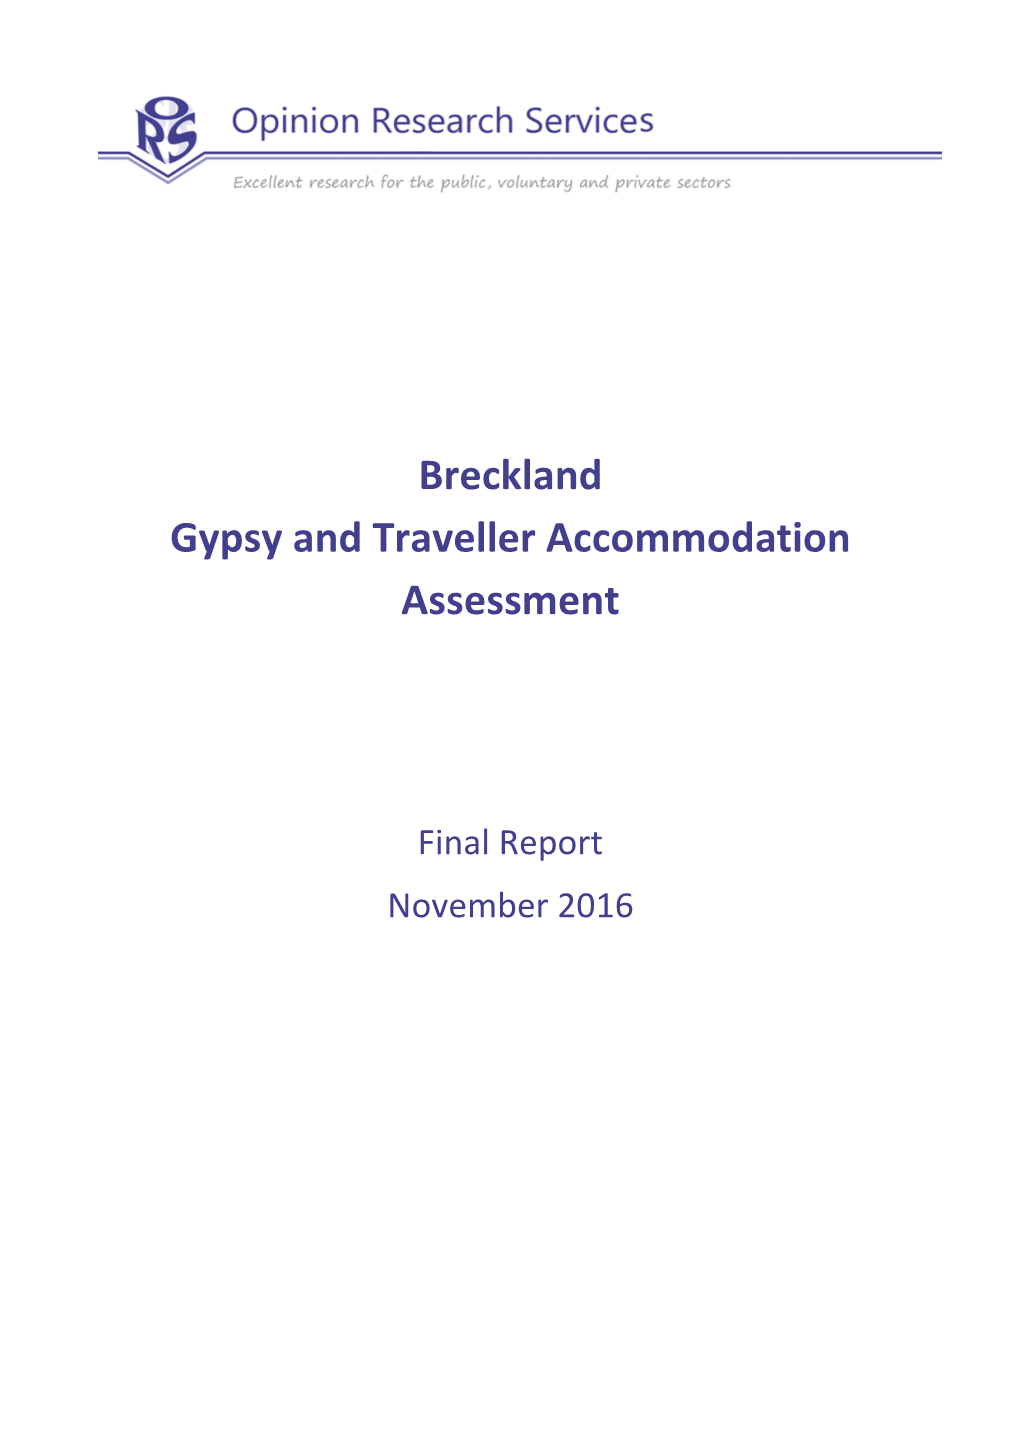 Breckland Gypsy and Traveller Accommodation Assessment